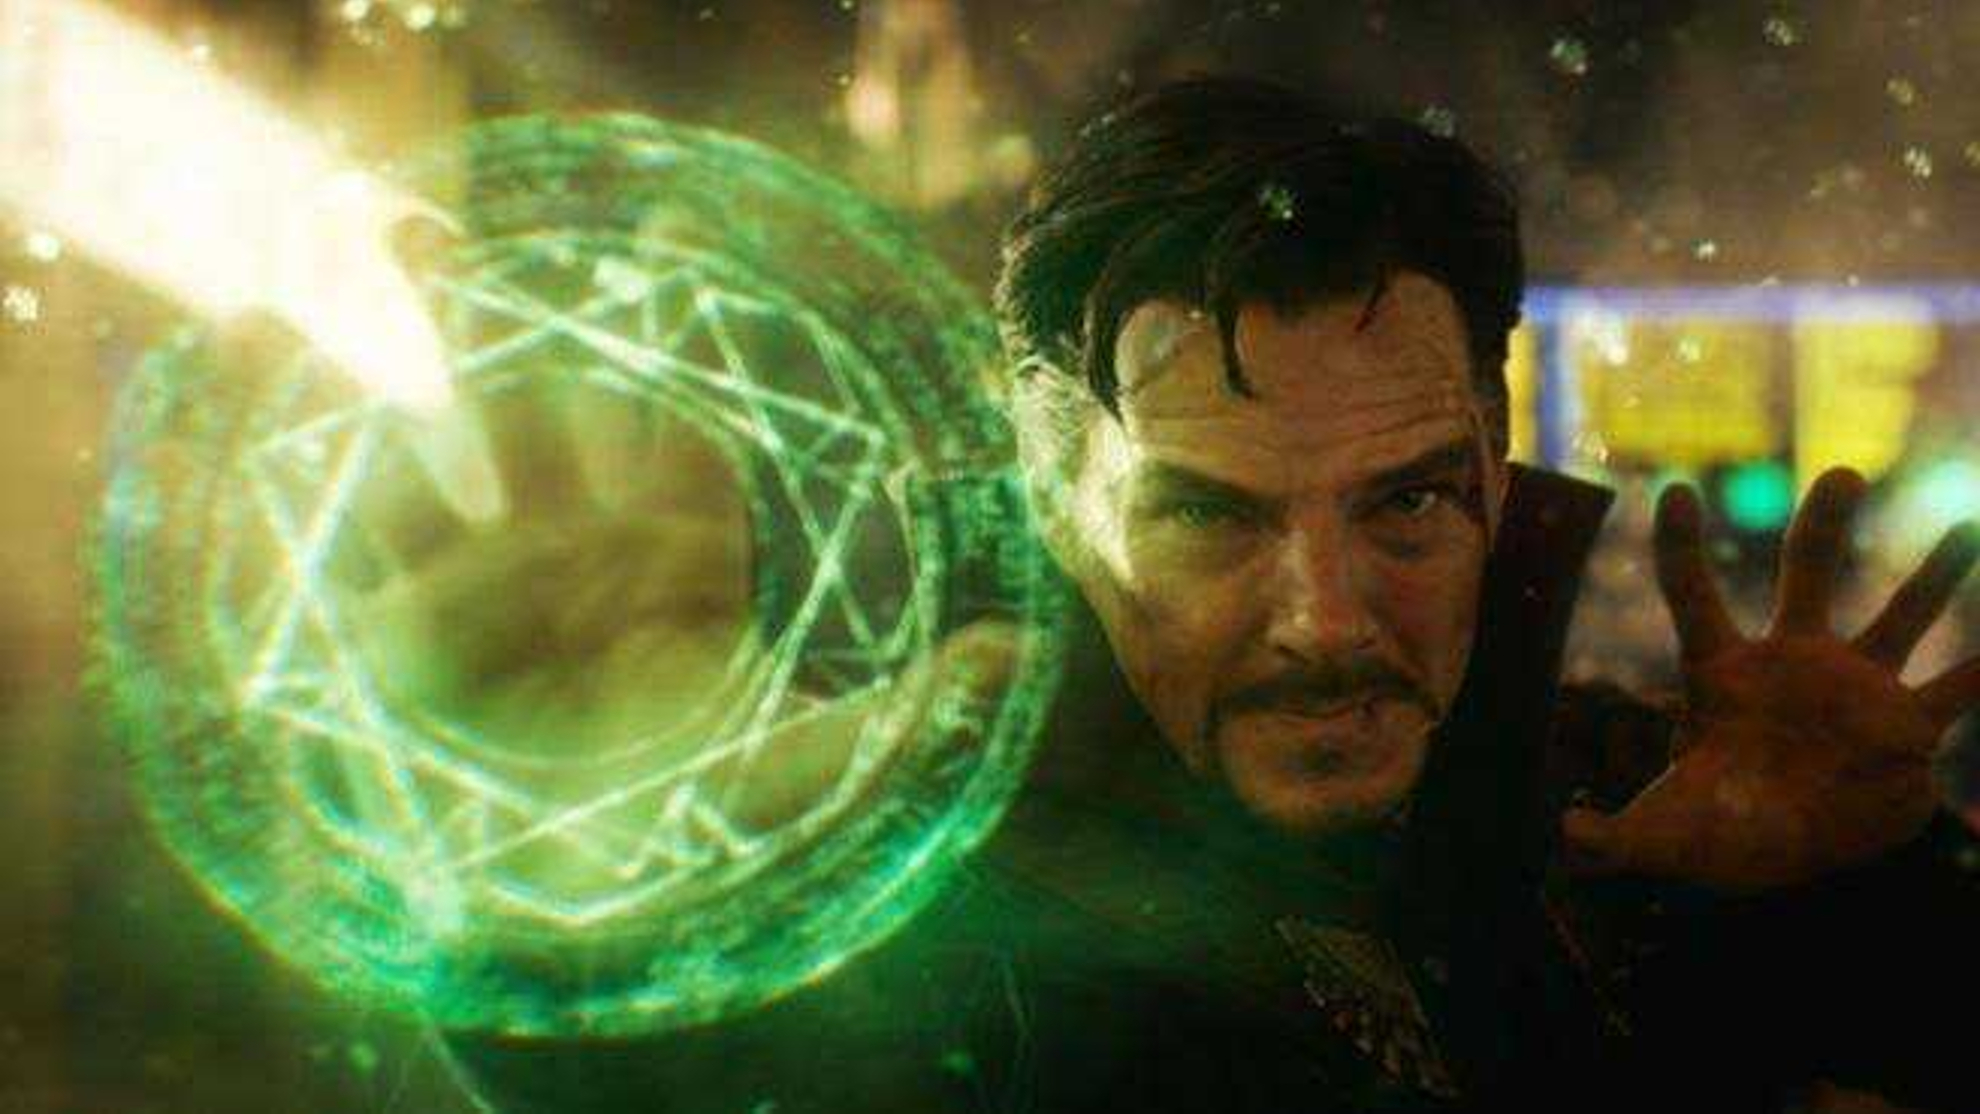 Marvel announces changes to its films: Doctor Strange 2, Thor Love, Thunder and Black Panther postpone release date